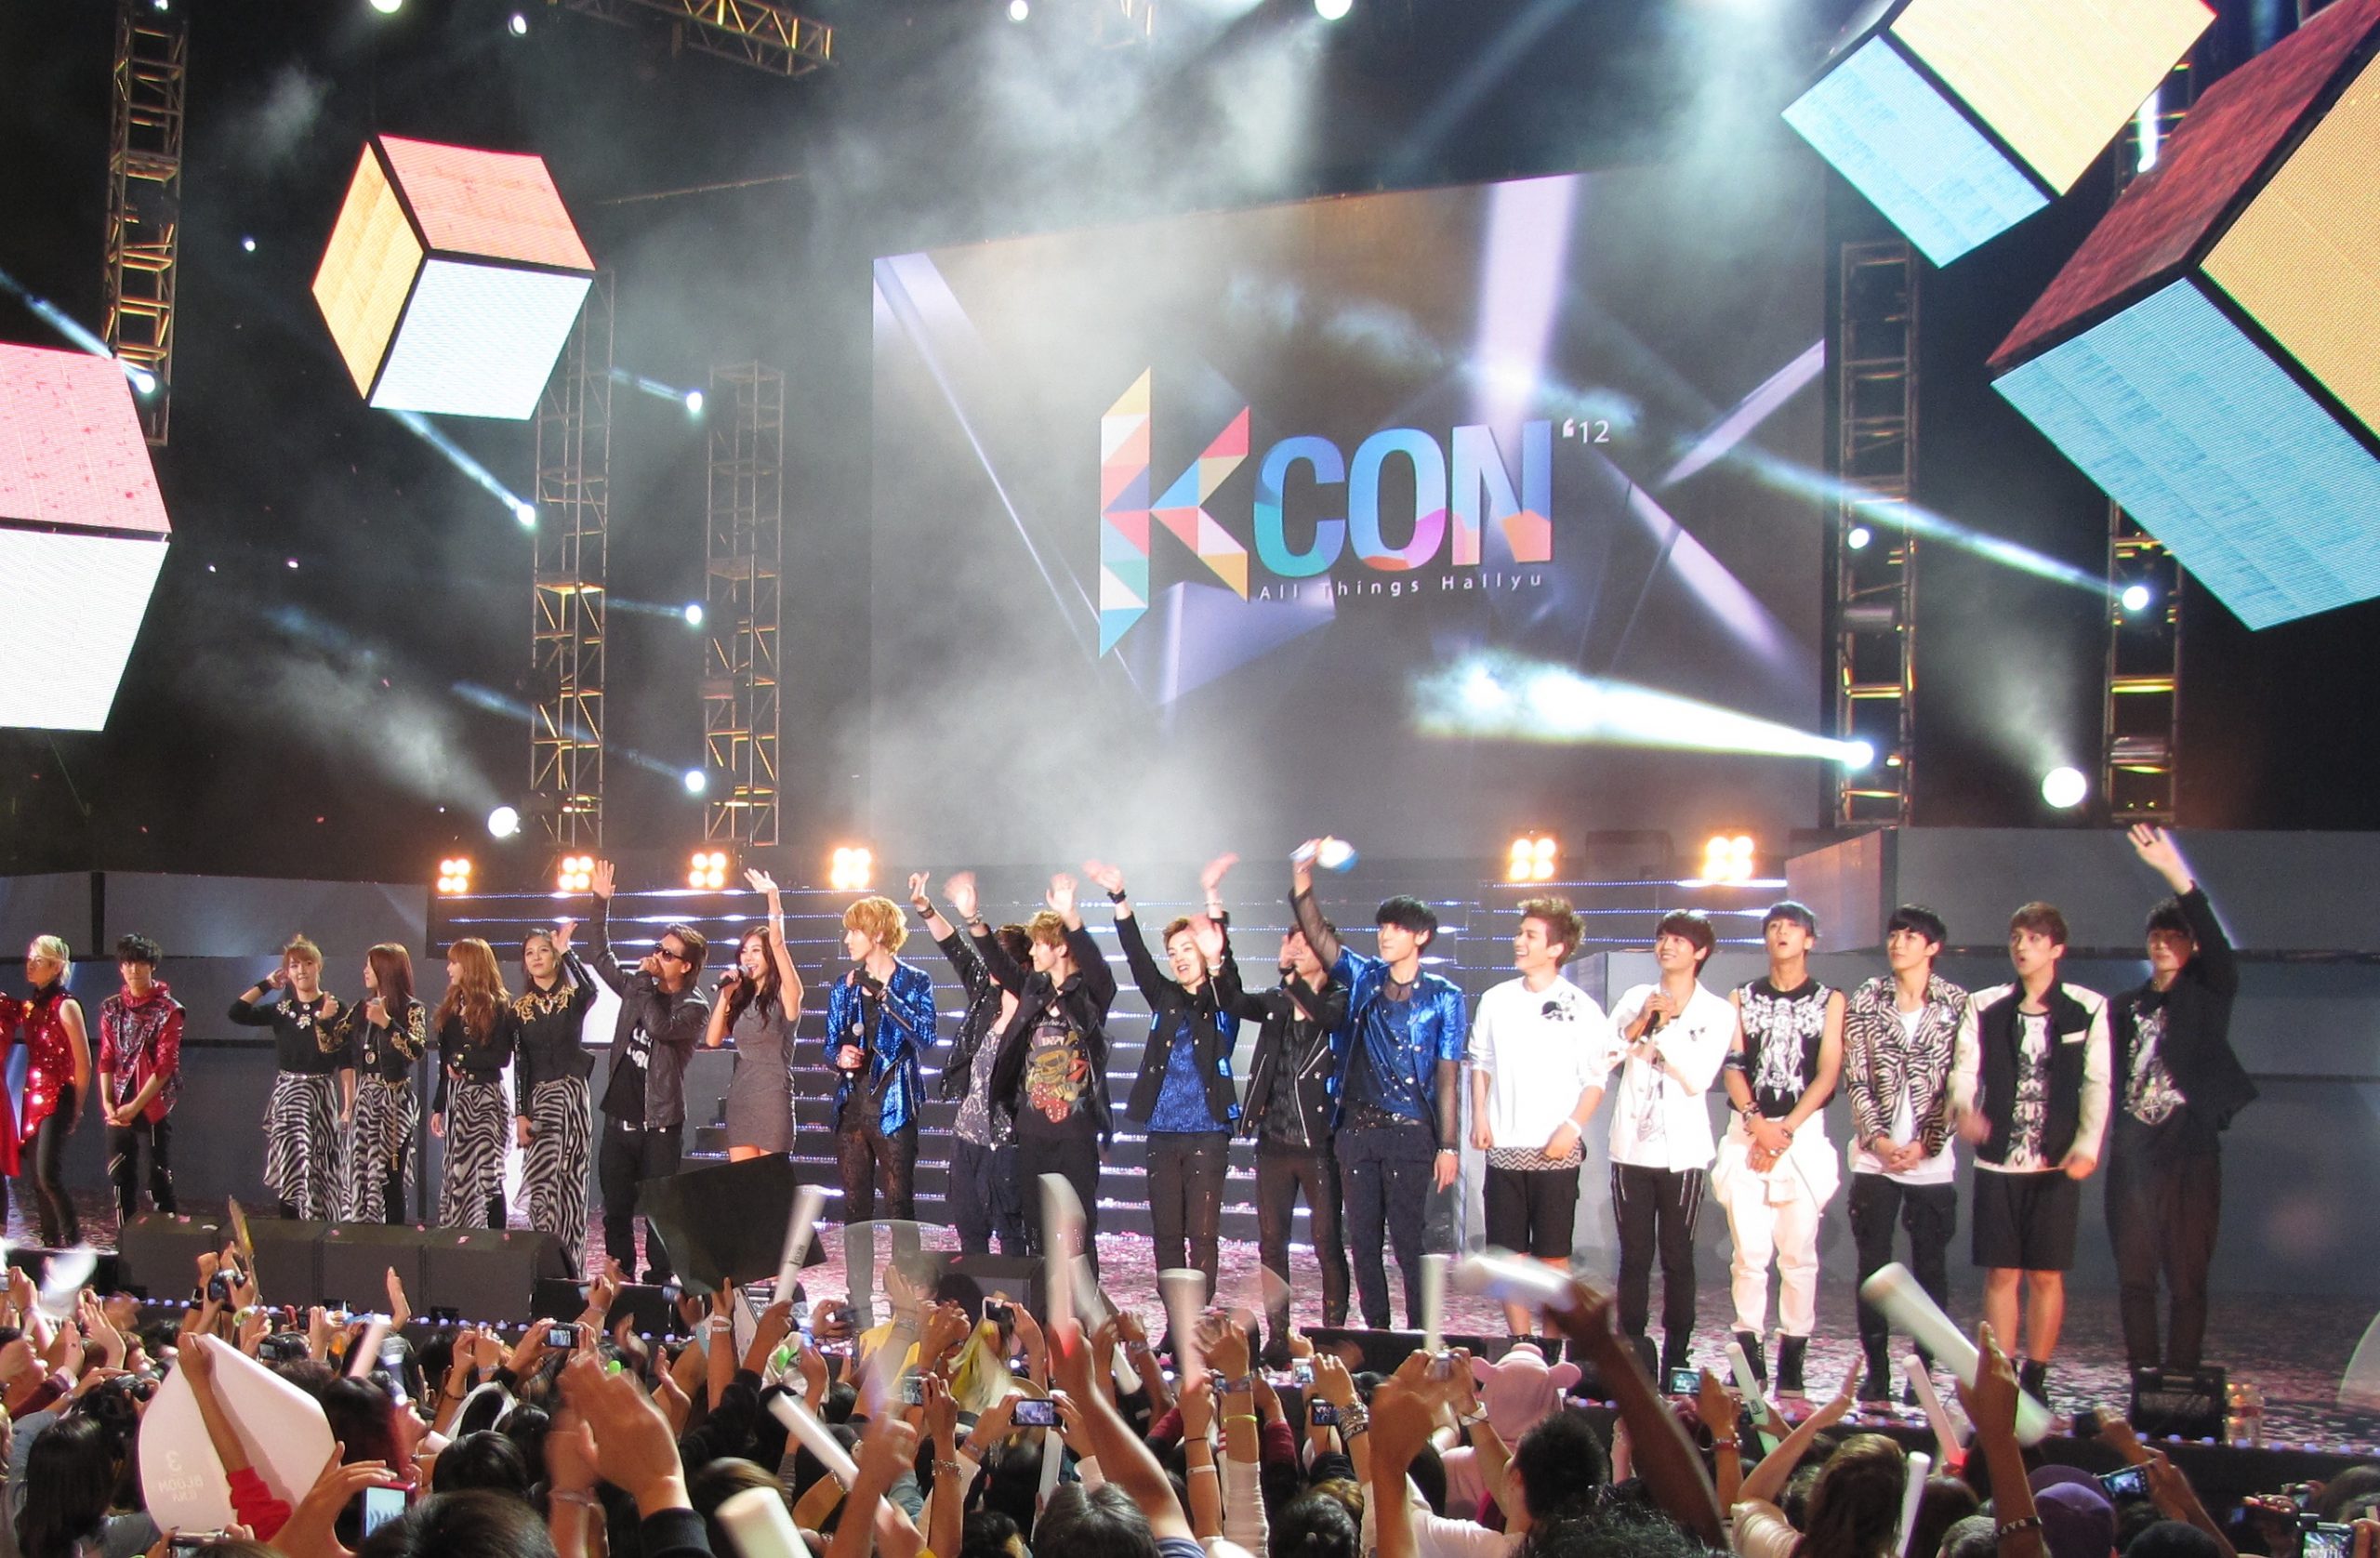 cj-enm-to-reportedly-host-kcon-as-online-concert-in-june-3